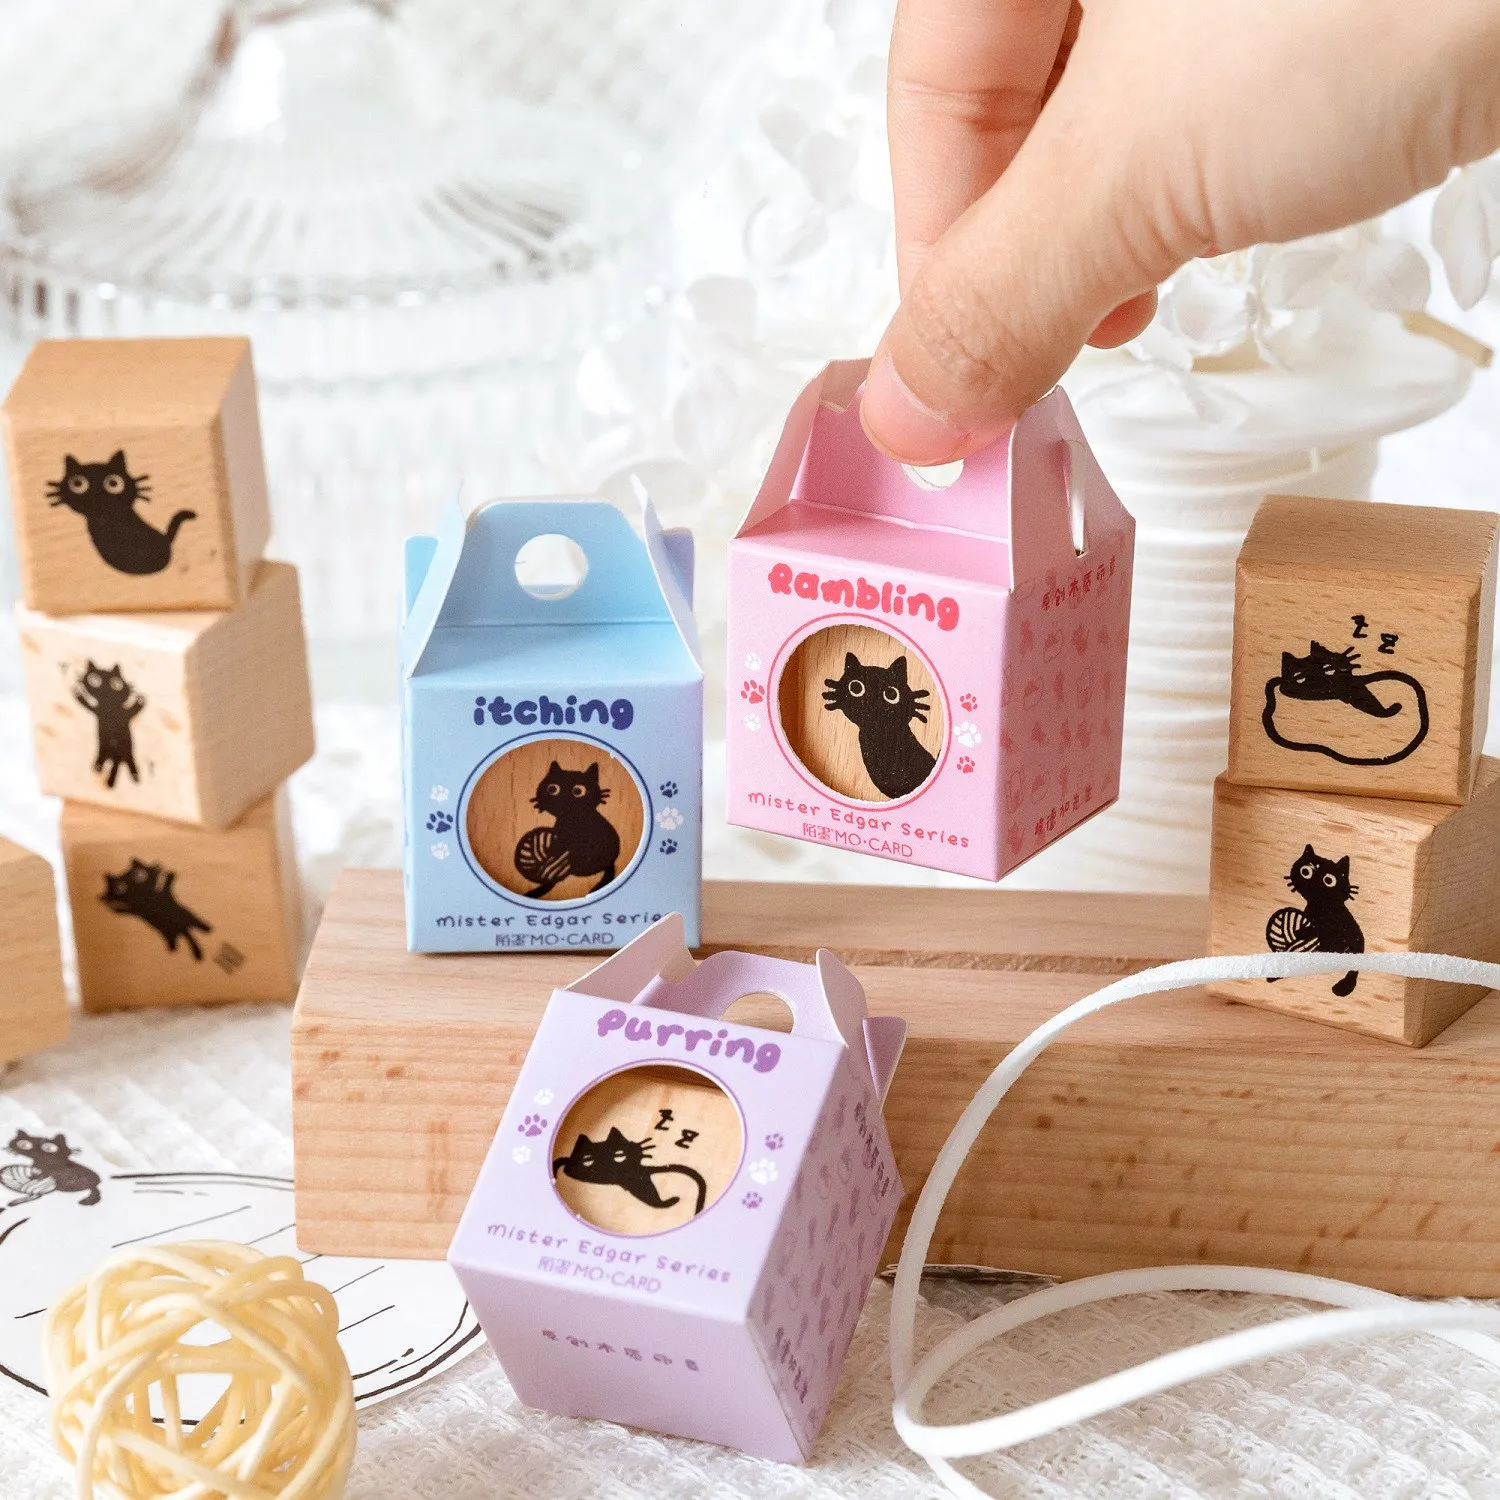 Black Cat Wooden Rubber Stamp Cute Kitty Decorative Wood Stamps For Journal Diary Scrapbook Letter DIY Craft Card Making